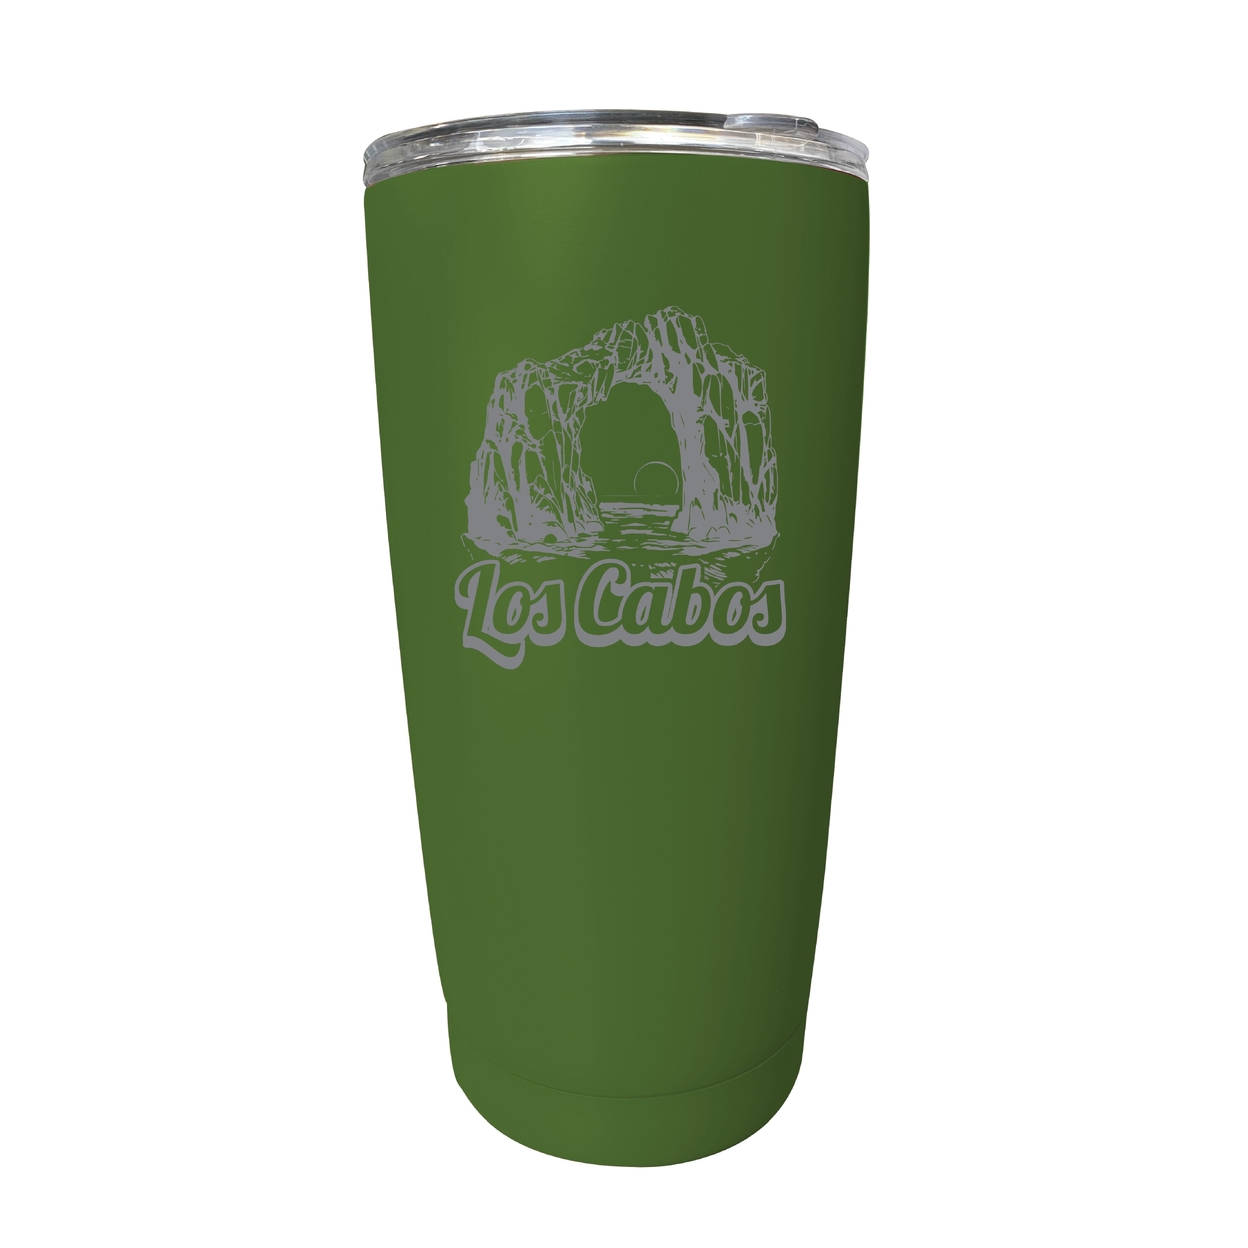 Los Cabos Mexico Souvenir 16 Oz Engraved Stainless Steel Insulated Tumbler - Green,,4-Pack